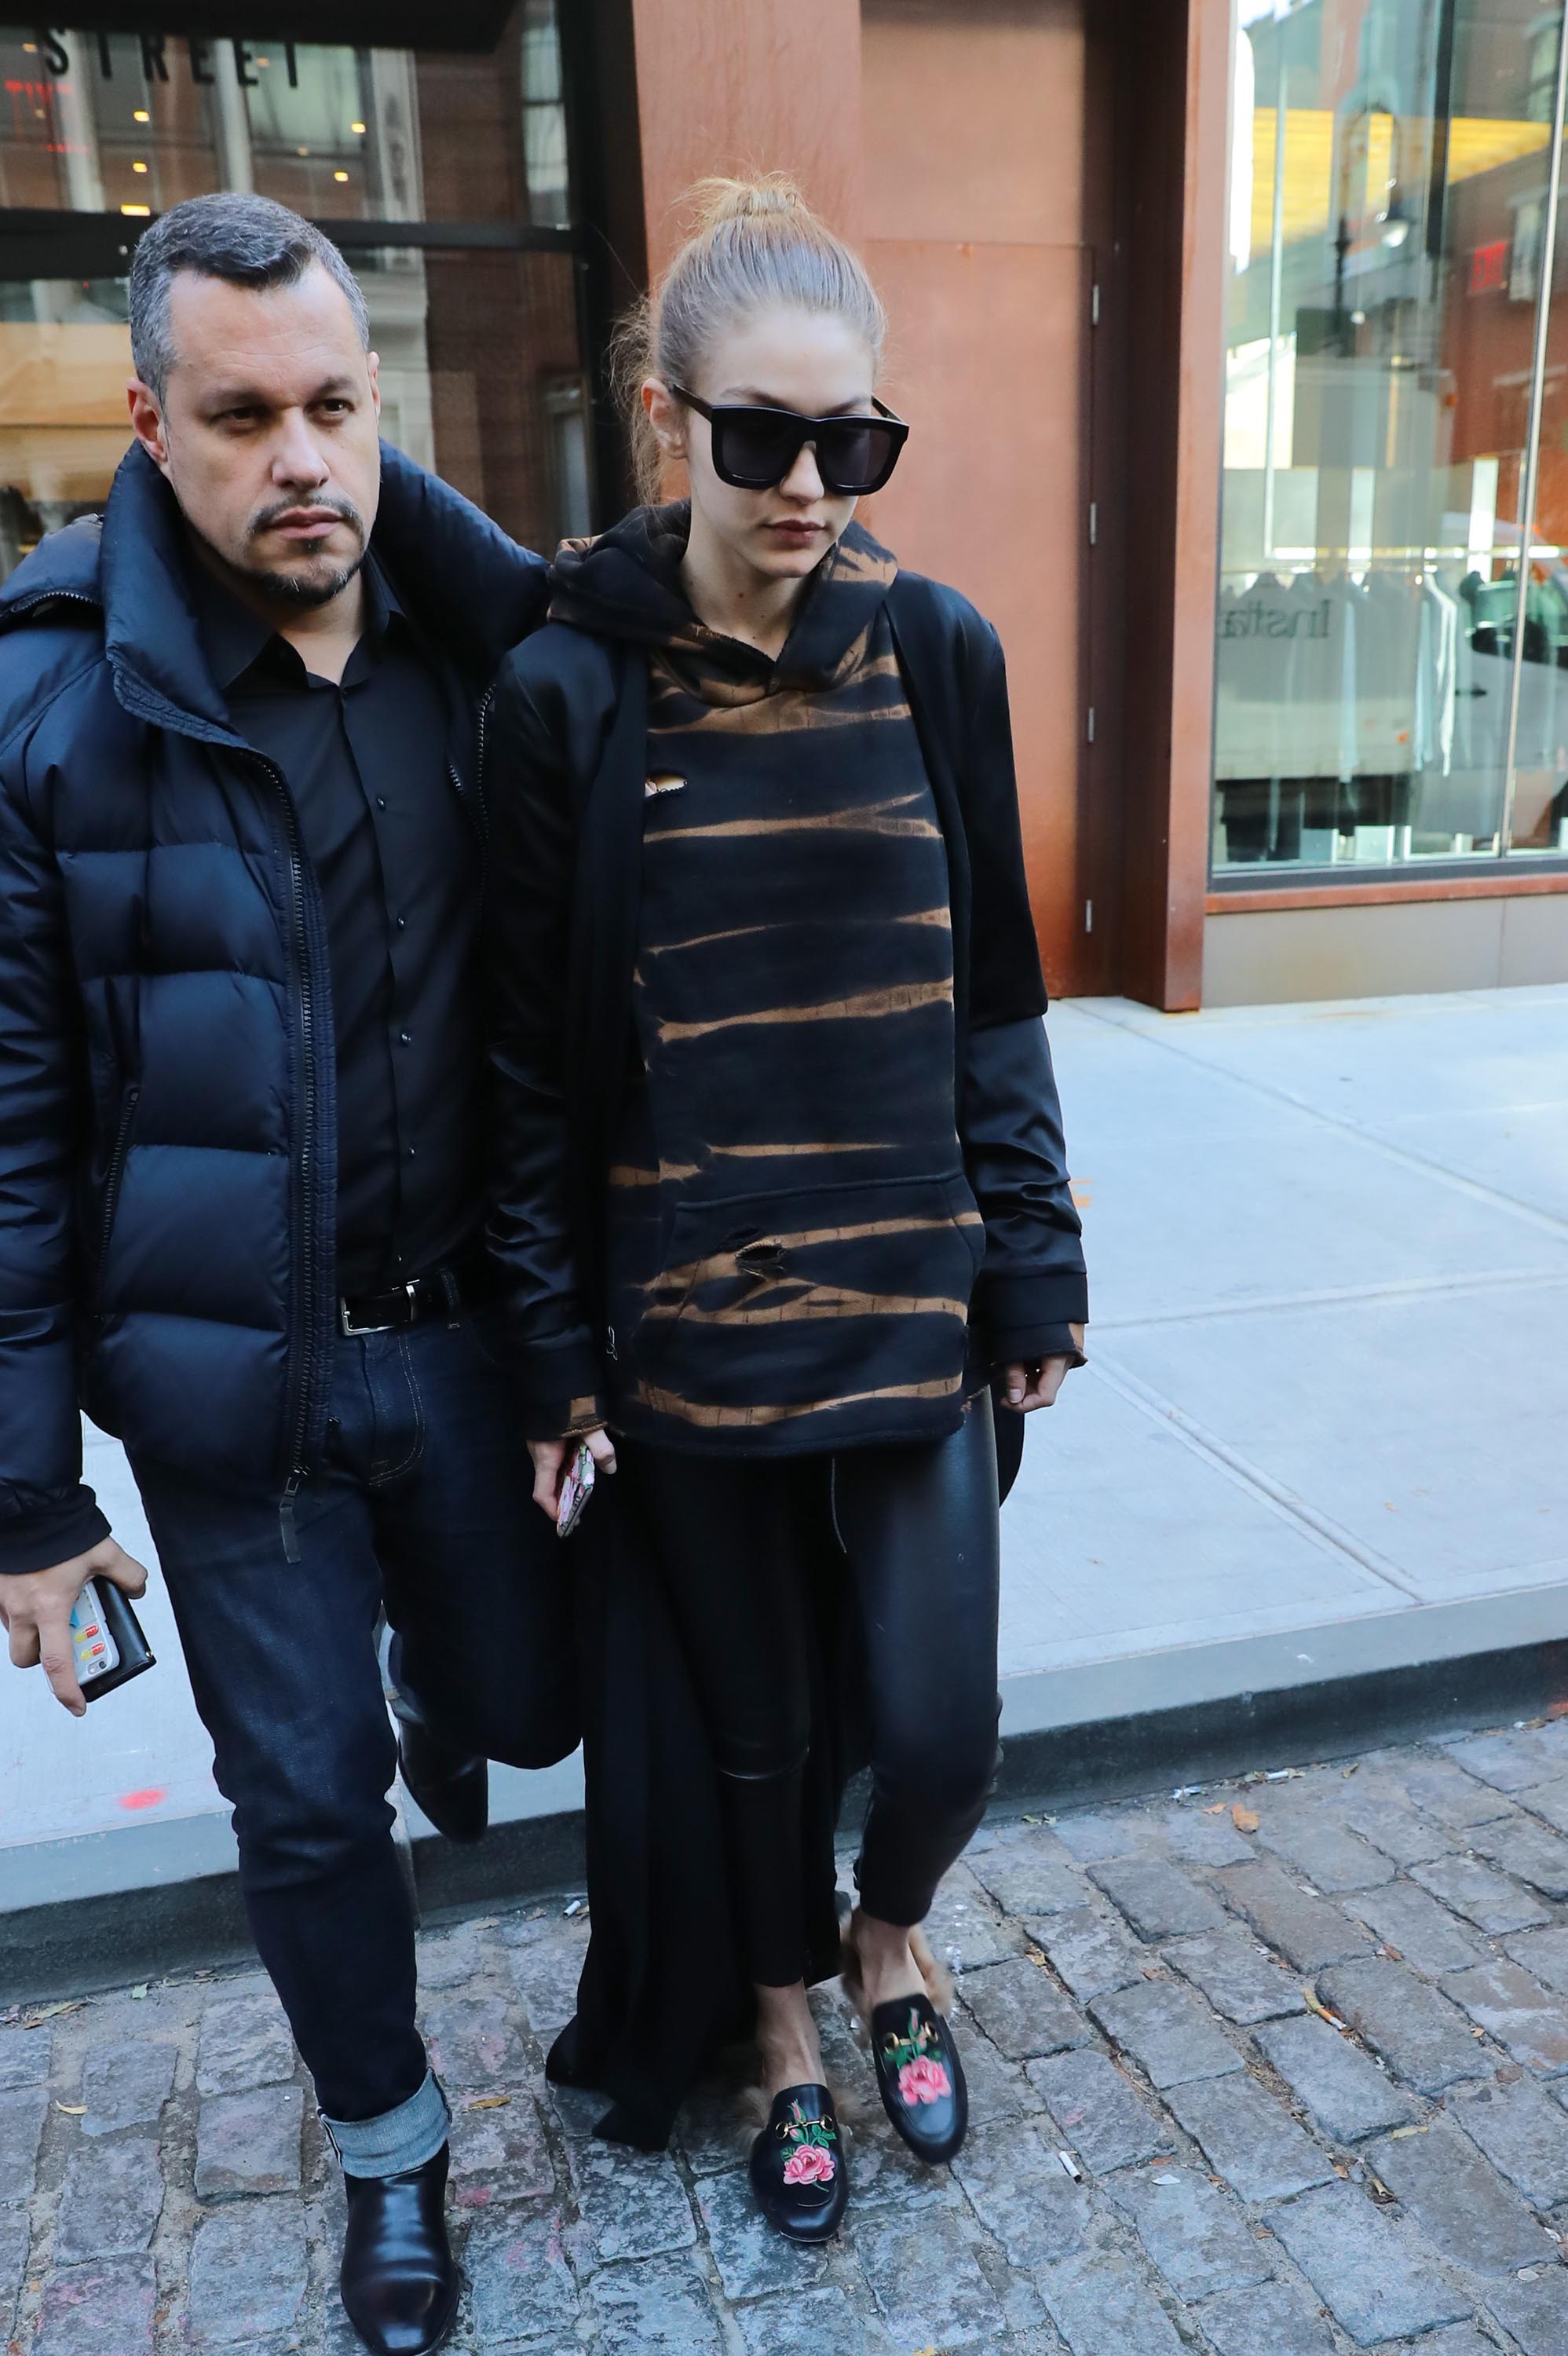 Gigi Hadid out & about in New York